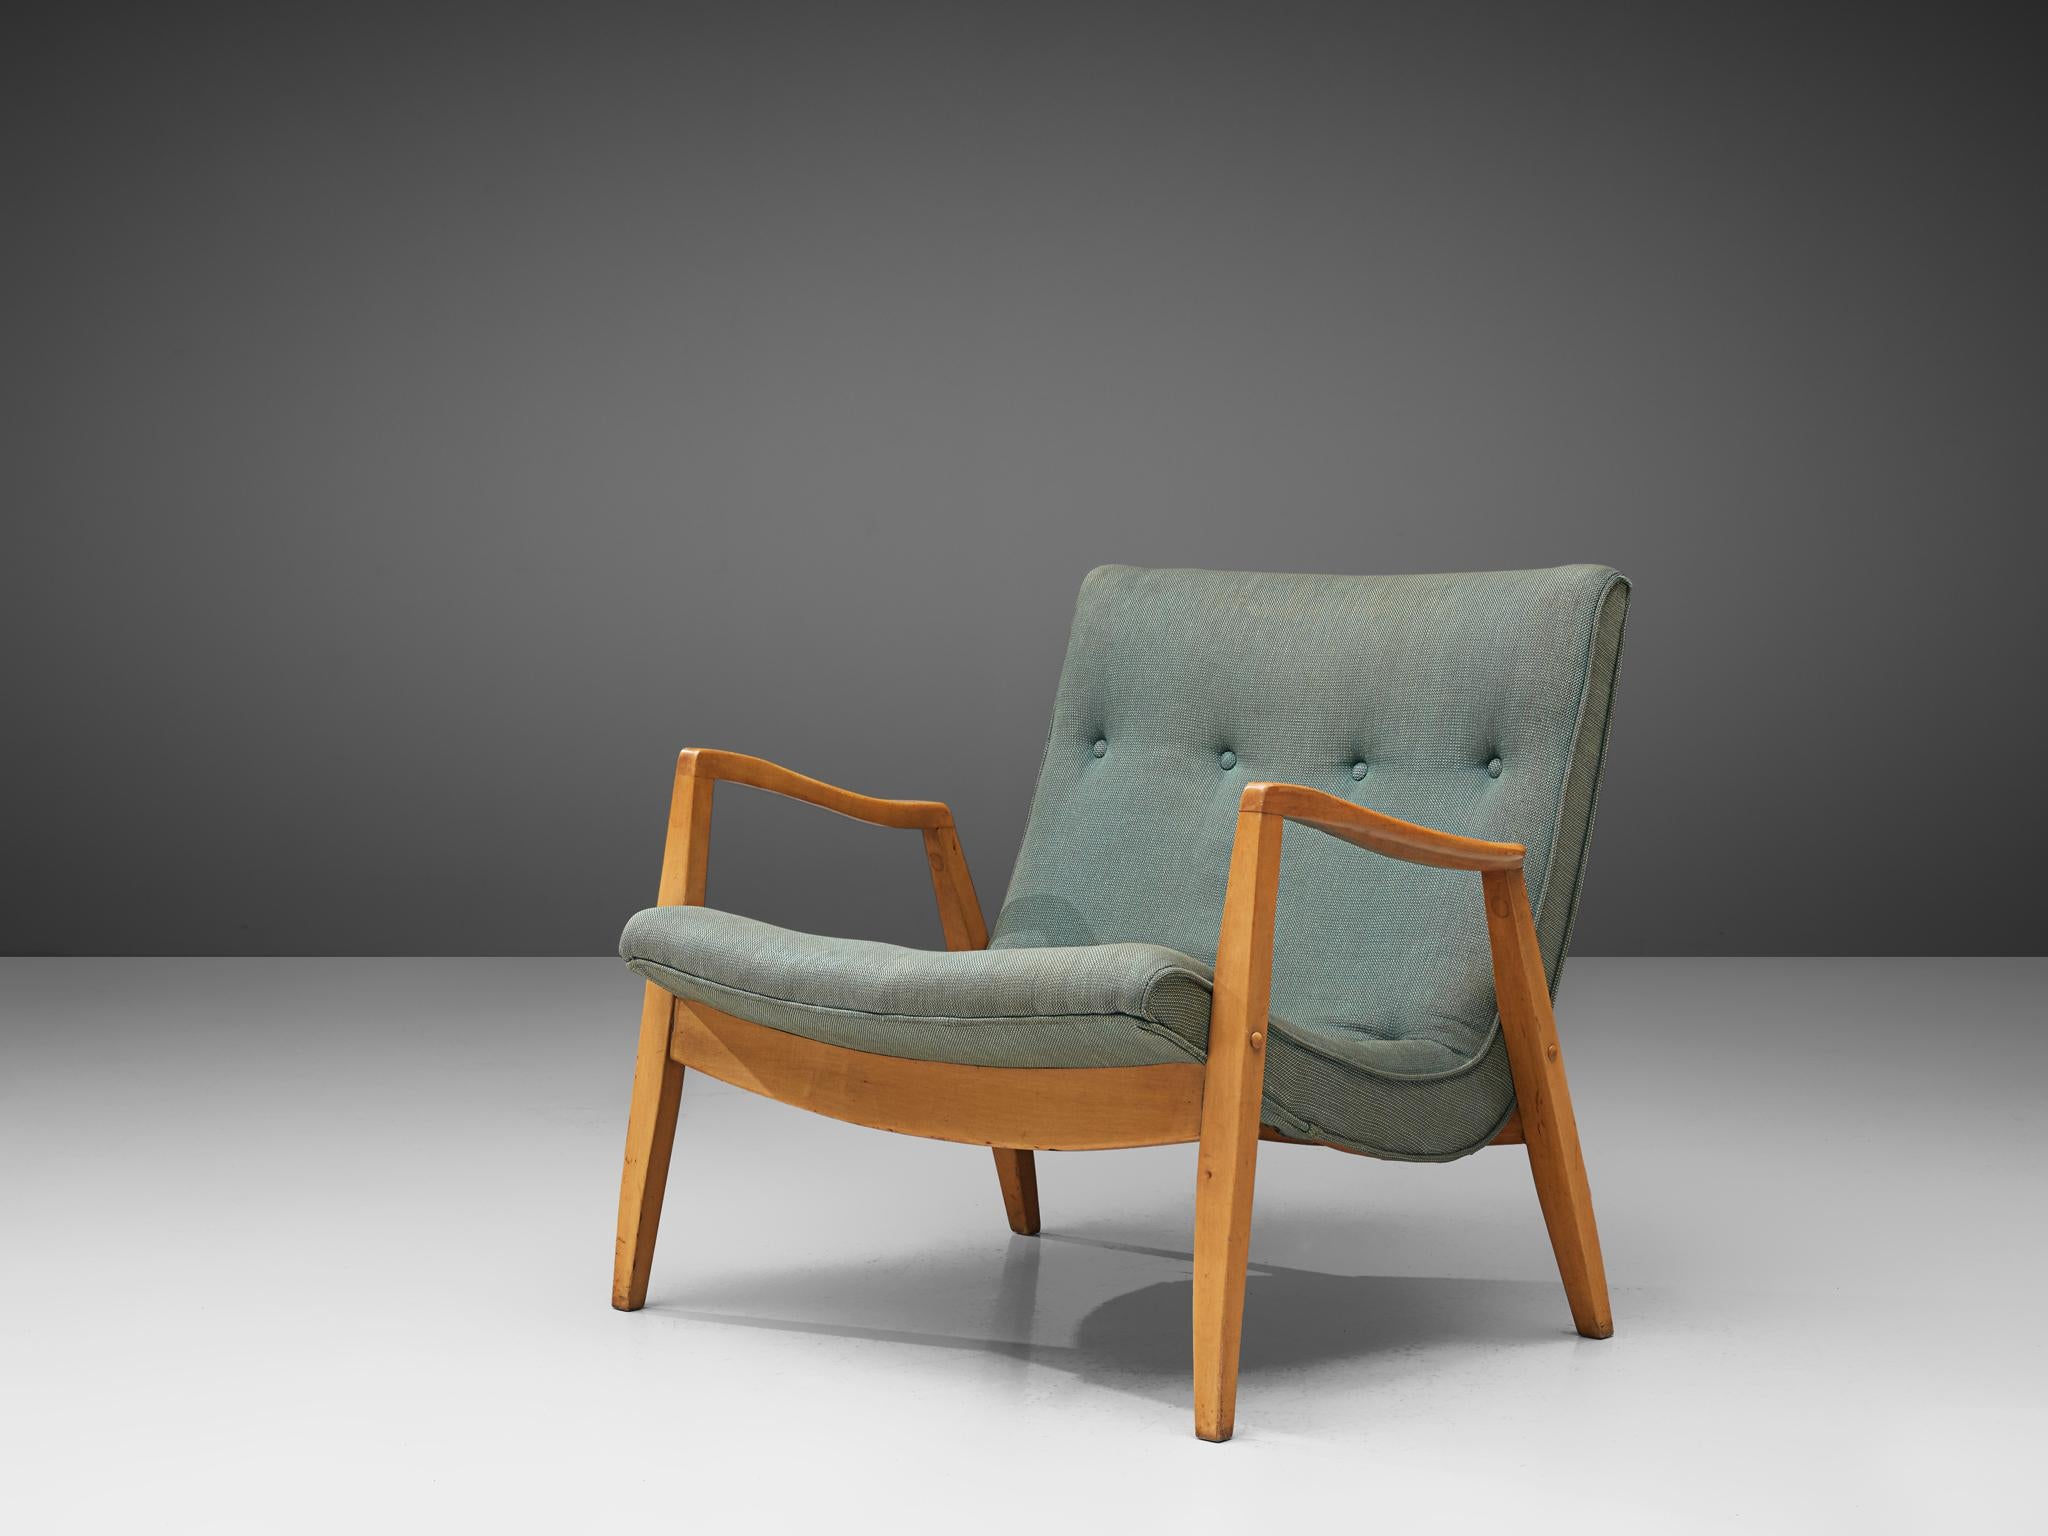 Milo Baughman for James Inc., 'Scoop' lounge chair, fabric and maple, United States, 1950s

'Scoop' lounge chair is a midcentury modern classic of Milo Baughman. The solid maple frame support the 'scoop' seat. The seat is upholstered in a green-blue